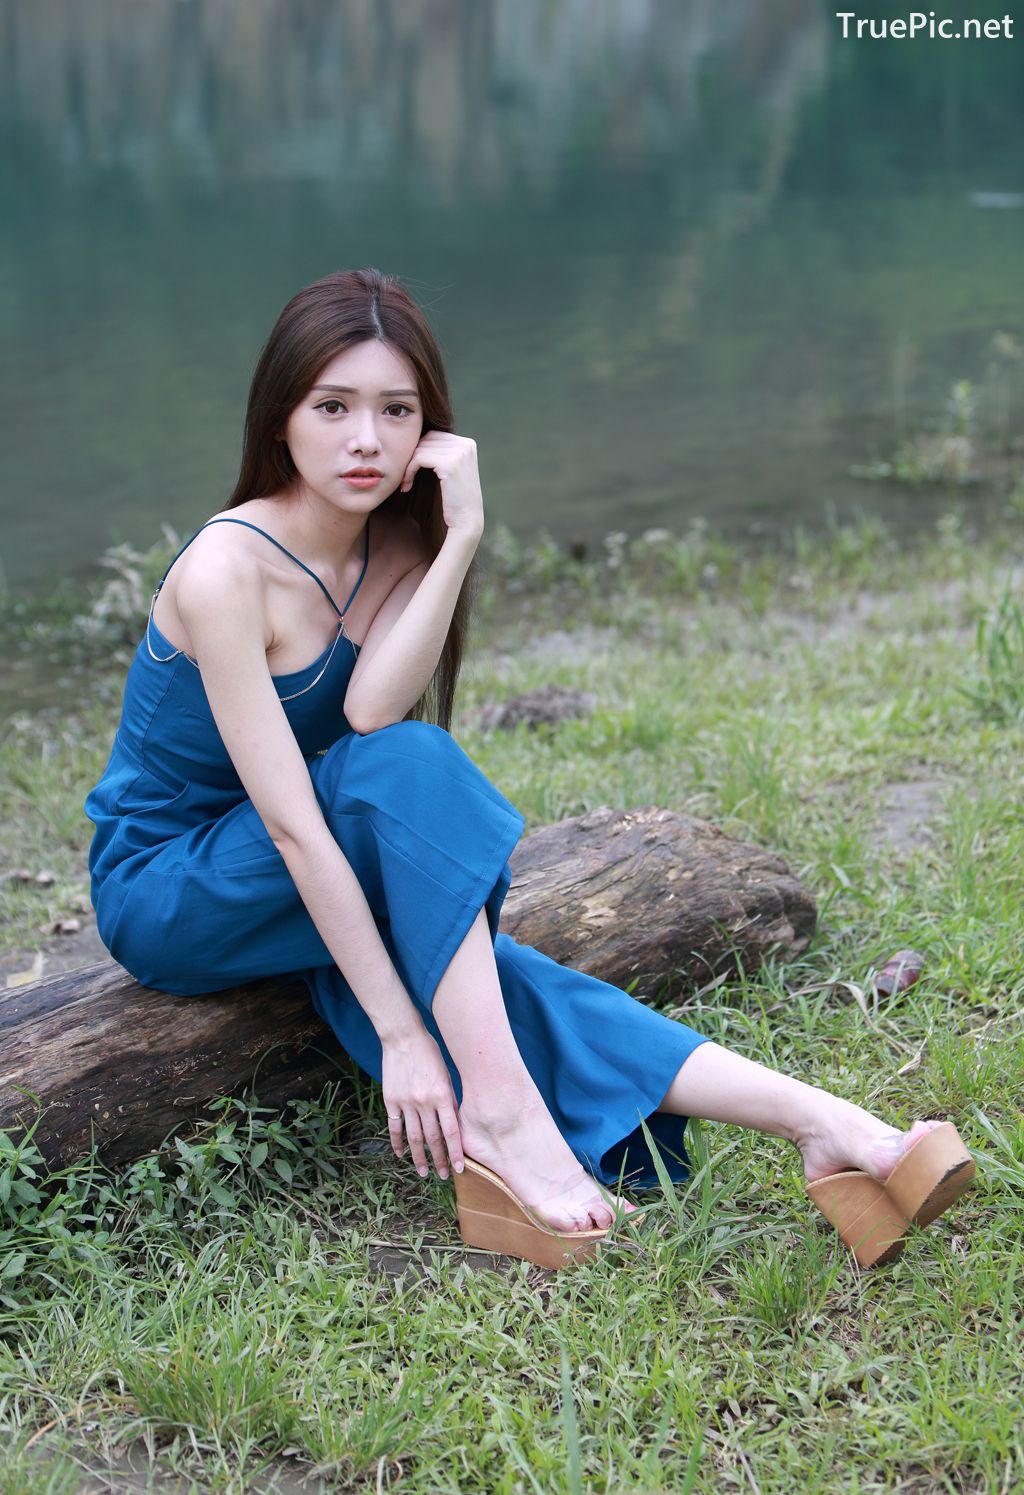 Image-Taiwanese-Pure-Girl-承容-Young-Beautiful-And-Lovely-TruePic.net- Picture-84